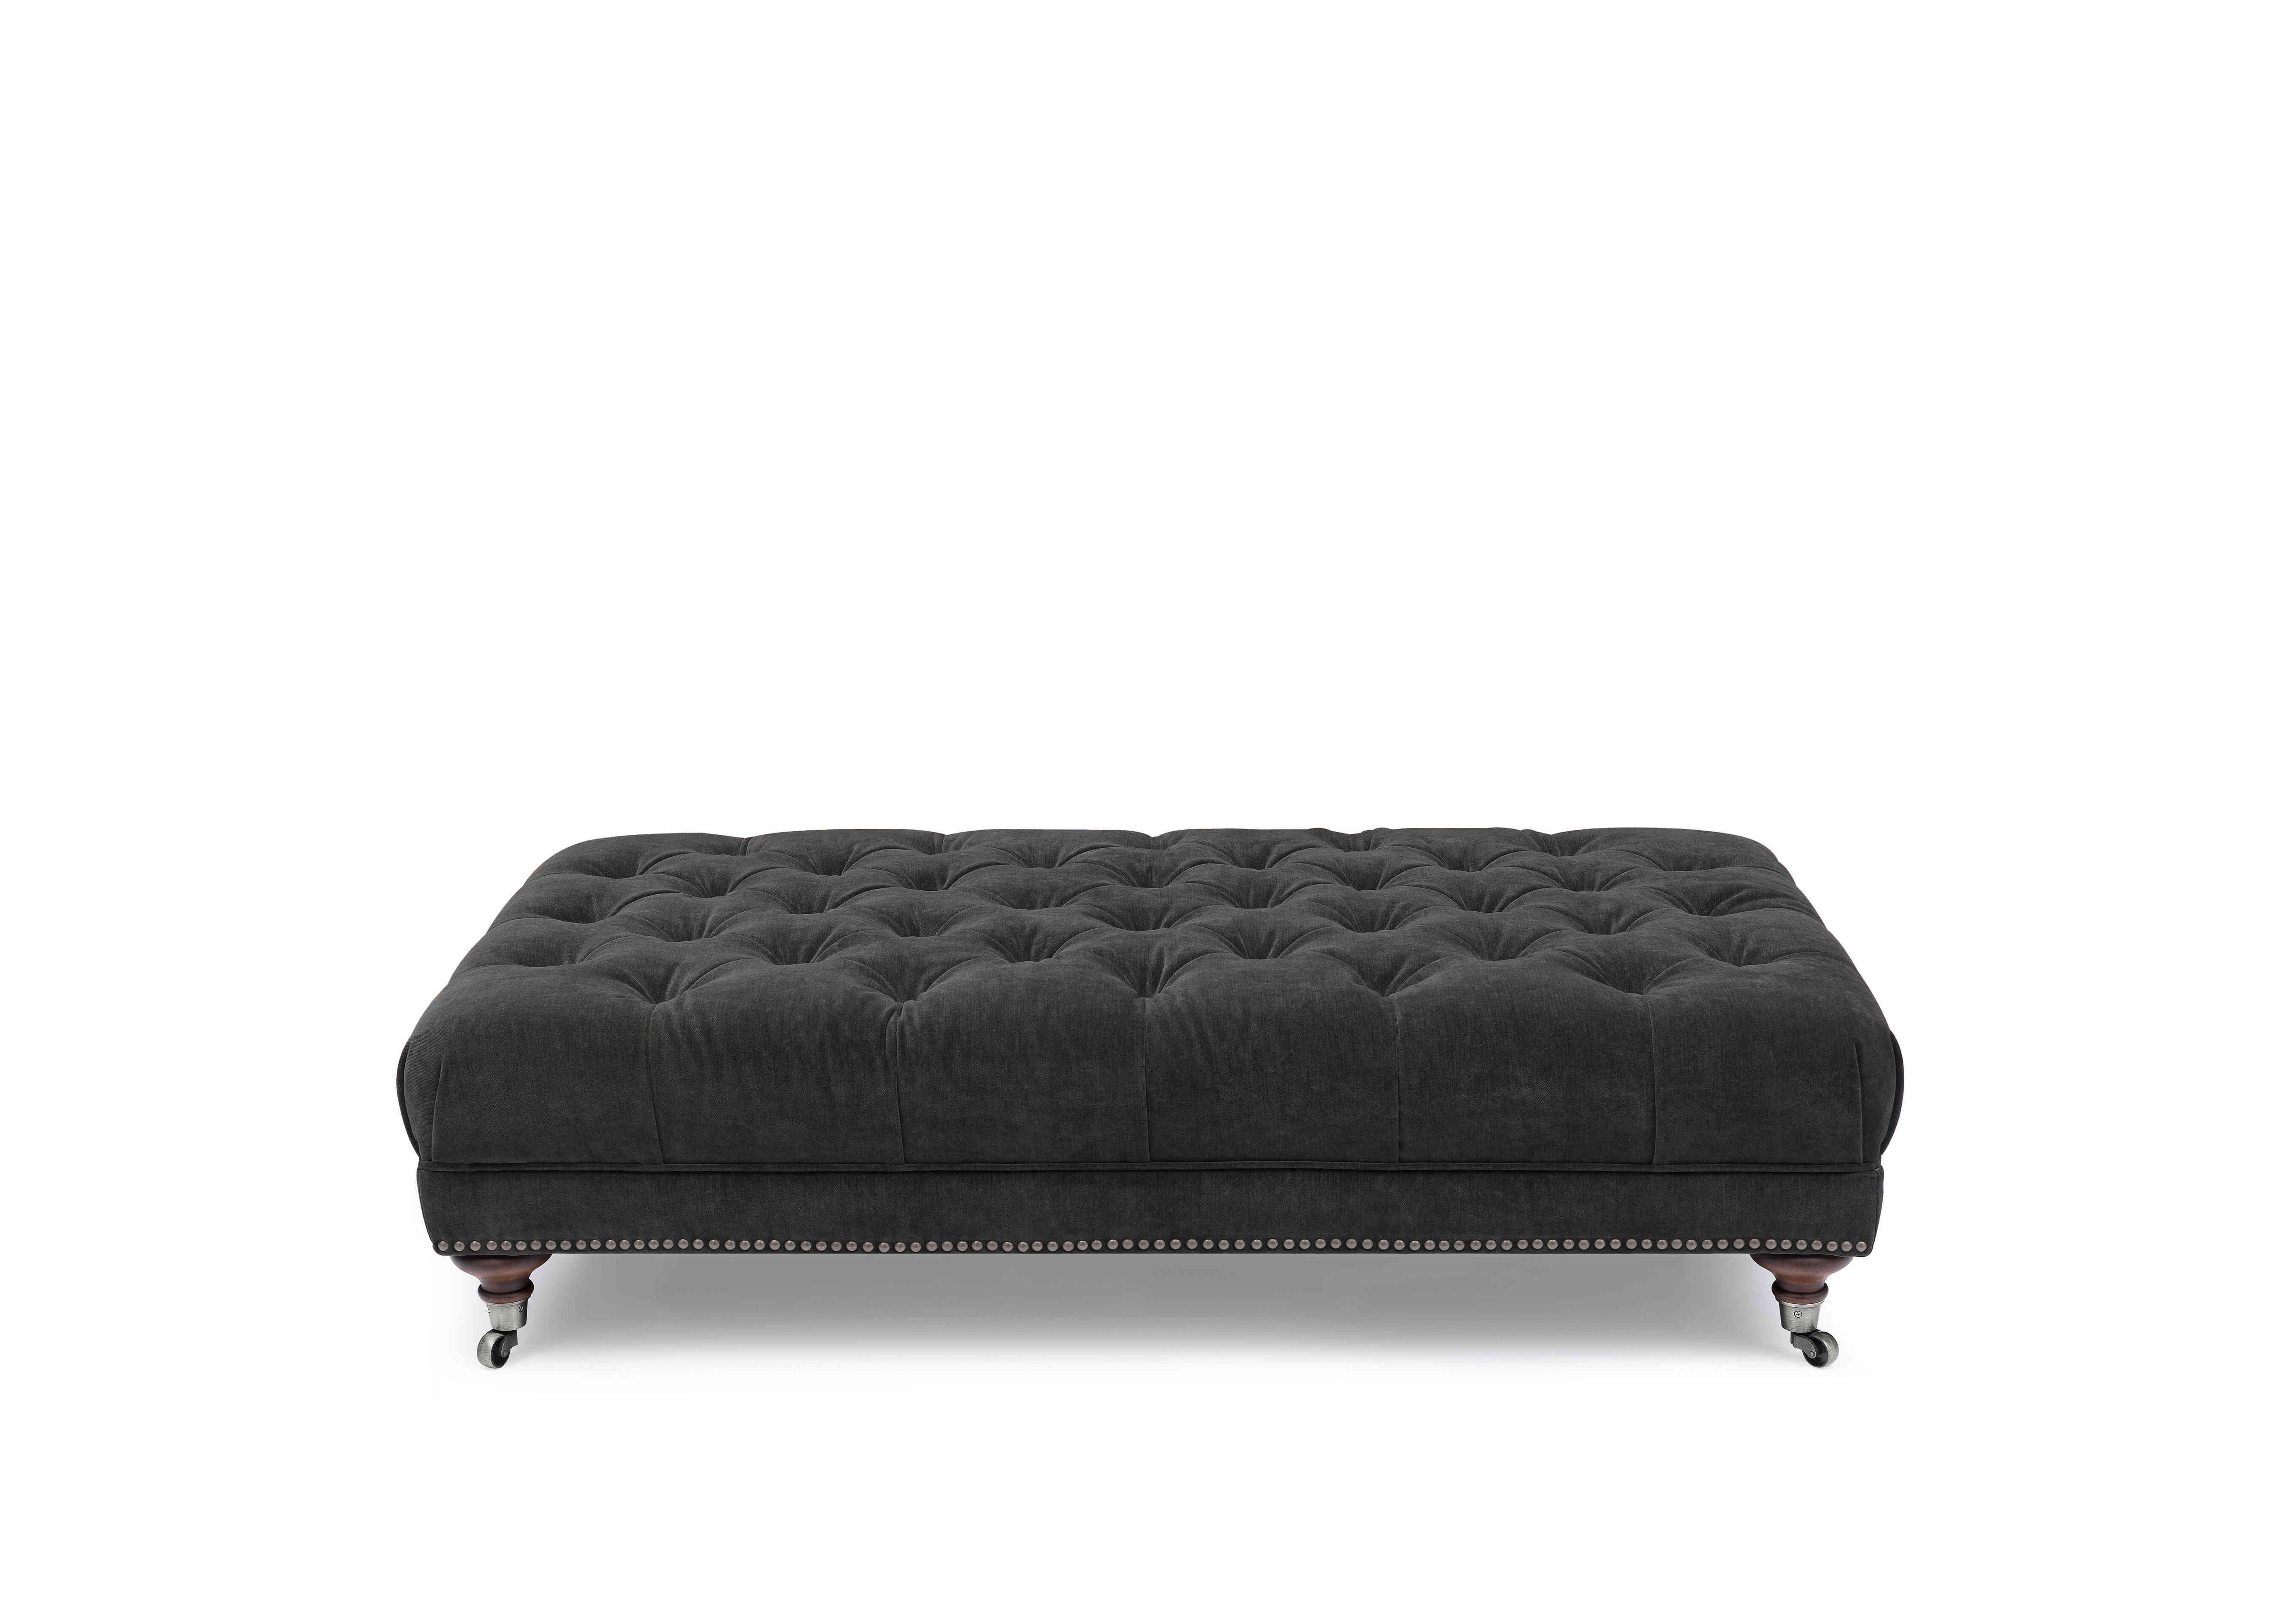 Wallace Fabric Rectangular Footstool with Castors in X3y2-W021 Moonstone on Furniture Village